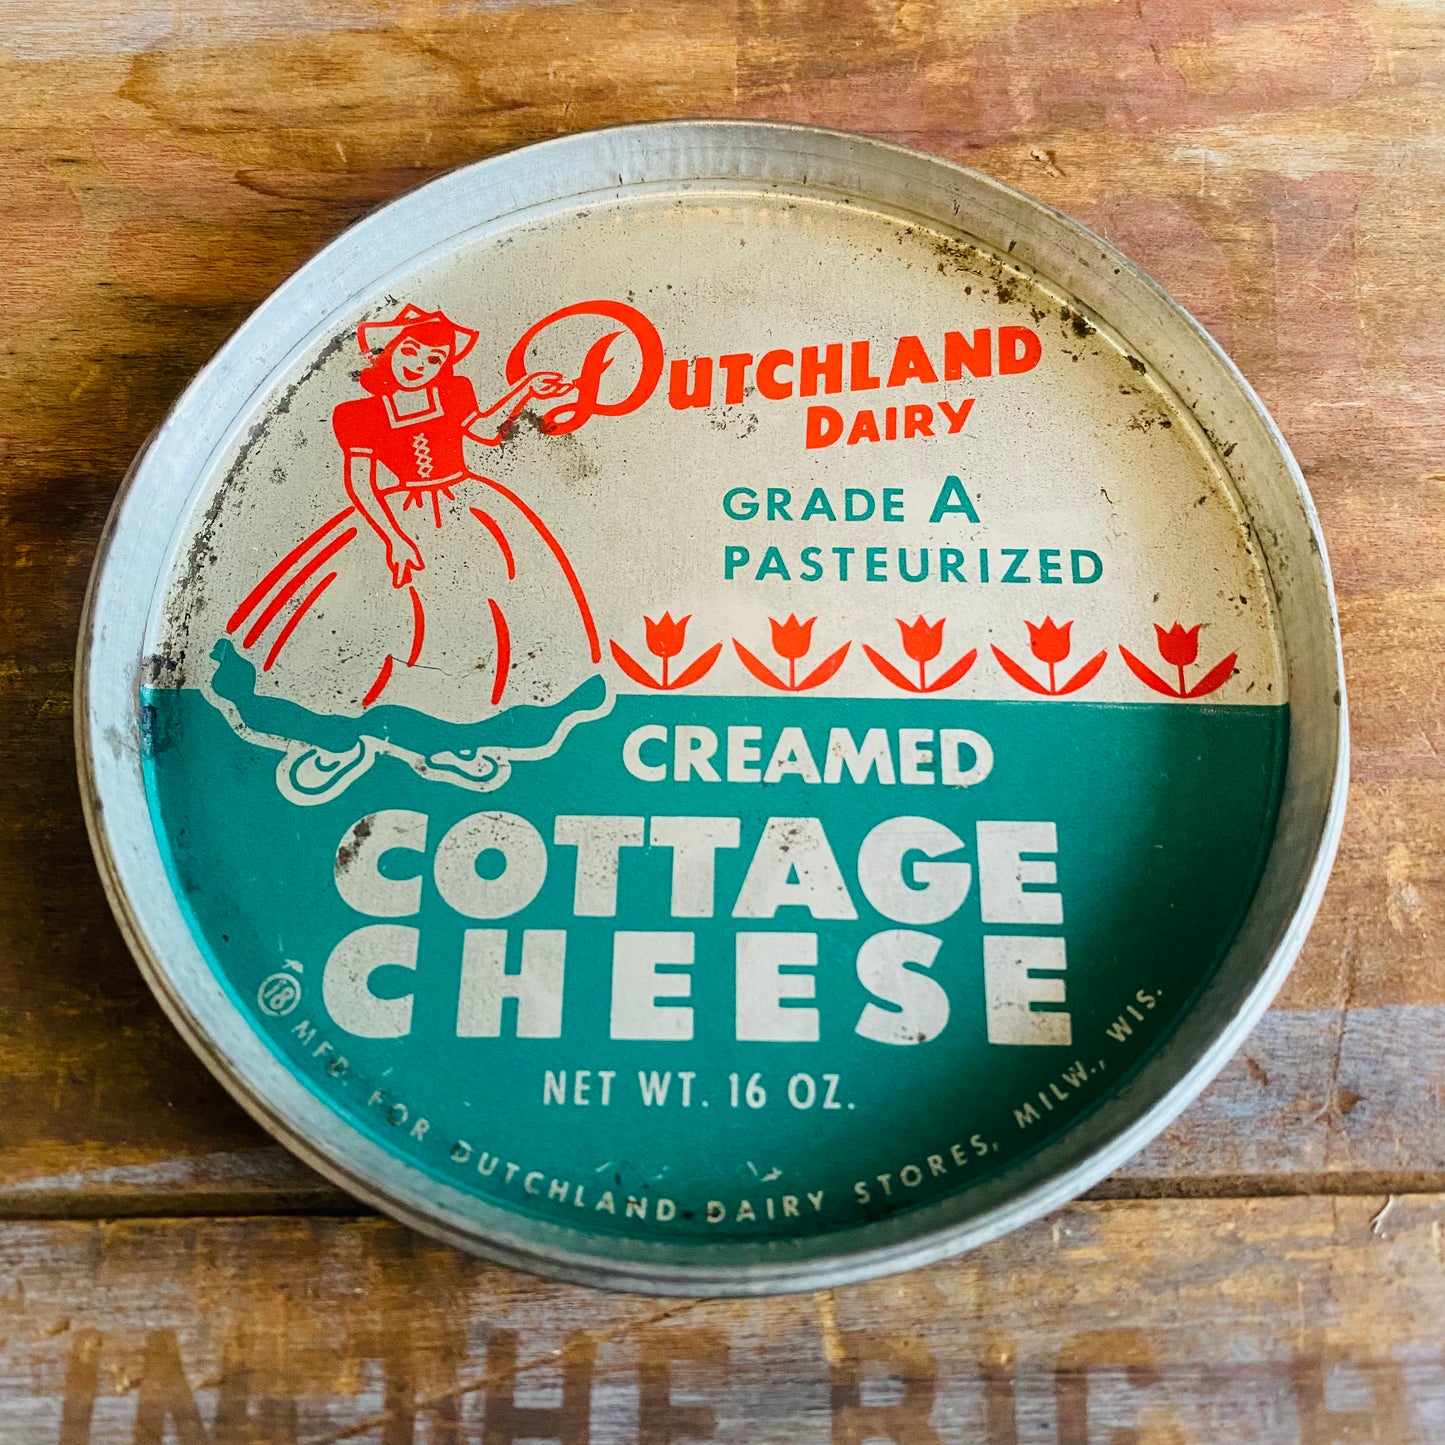 【USA vintage】COTTAGE CHEESE 蓋 チーズ